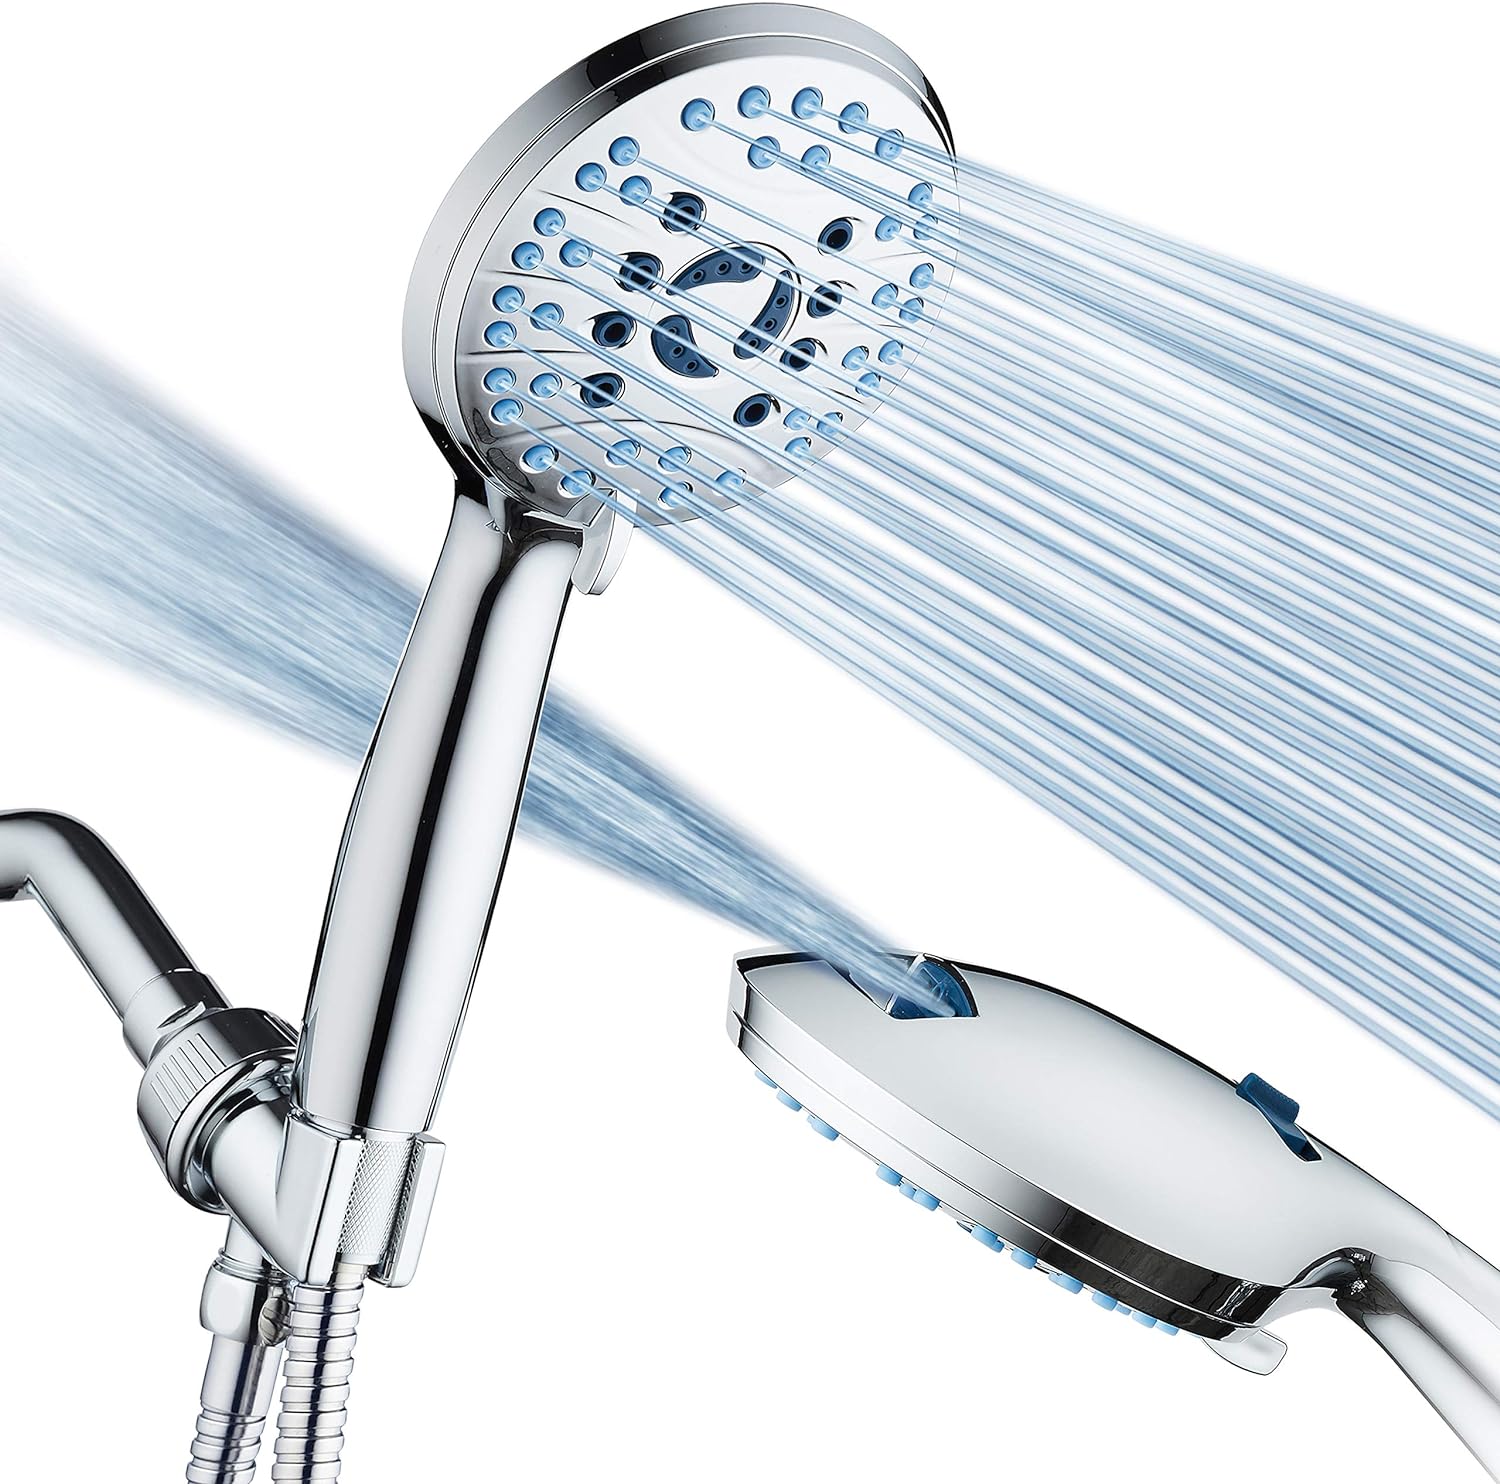 AquaCare High Pressure 8-mode Handheld Shower Head - Anti-clog Nozzles, Built-in Power Wash to Clean Tub, Tile  Pets, Extra Long 6 ft. Stainless Steel Hose, Wall  Overhead Brackets